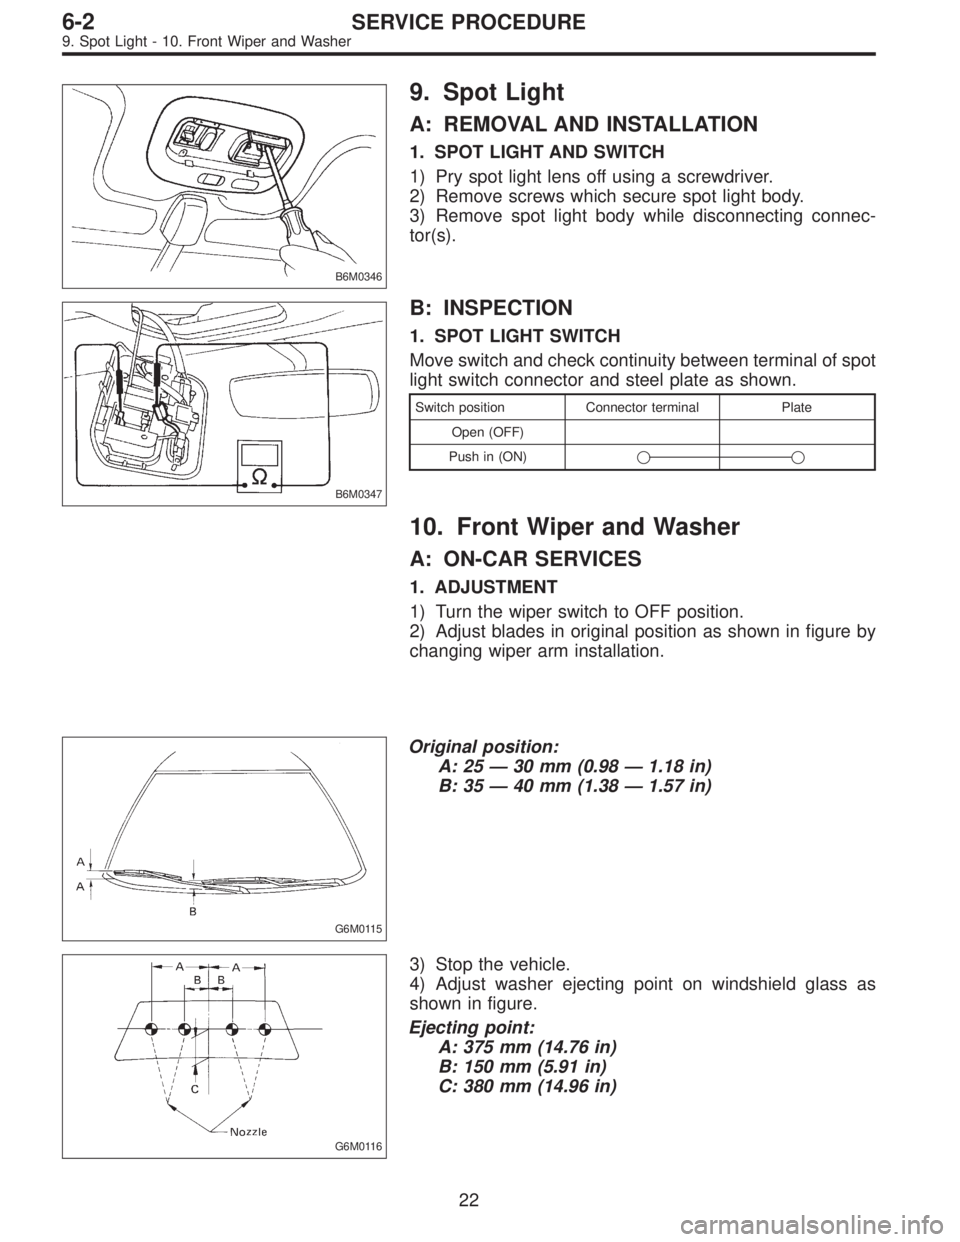 SUBARU LEGACY 1996  Service Repair Manual B6M0346
9. Spot Light
A: REMOVAL AND INSTALLATION
1. SPOT LIGHT AND SWITCH
1) Pry spot light lens off using a screwdriver.
2) Remove screws which secure spot light body.
3) Remove spot light body whil